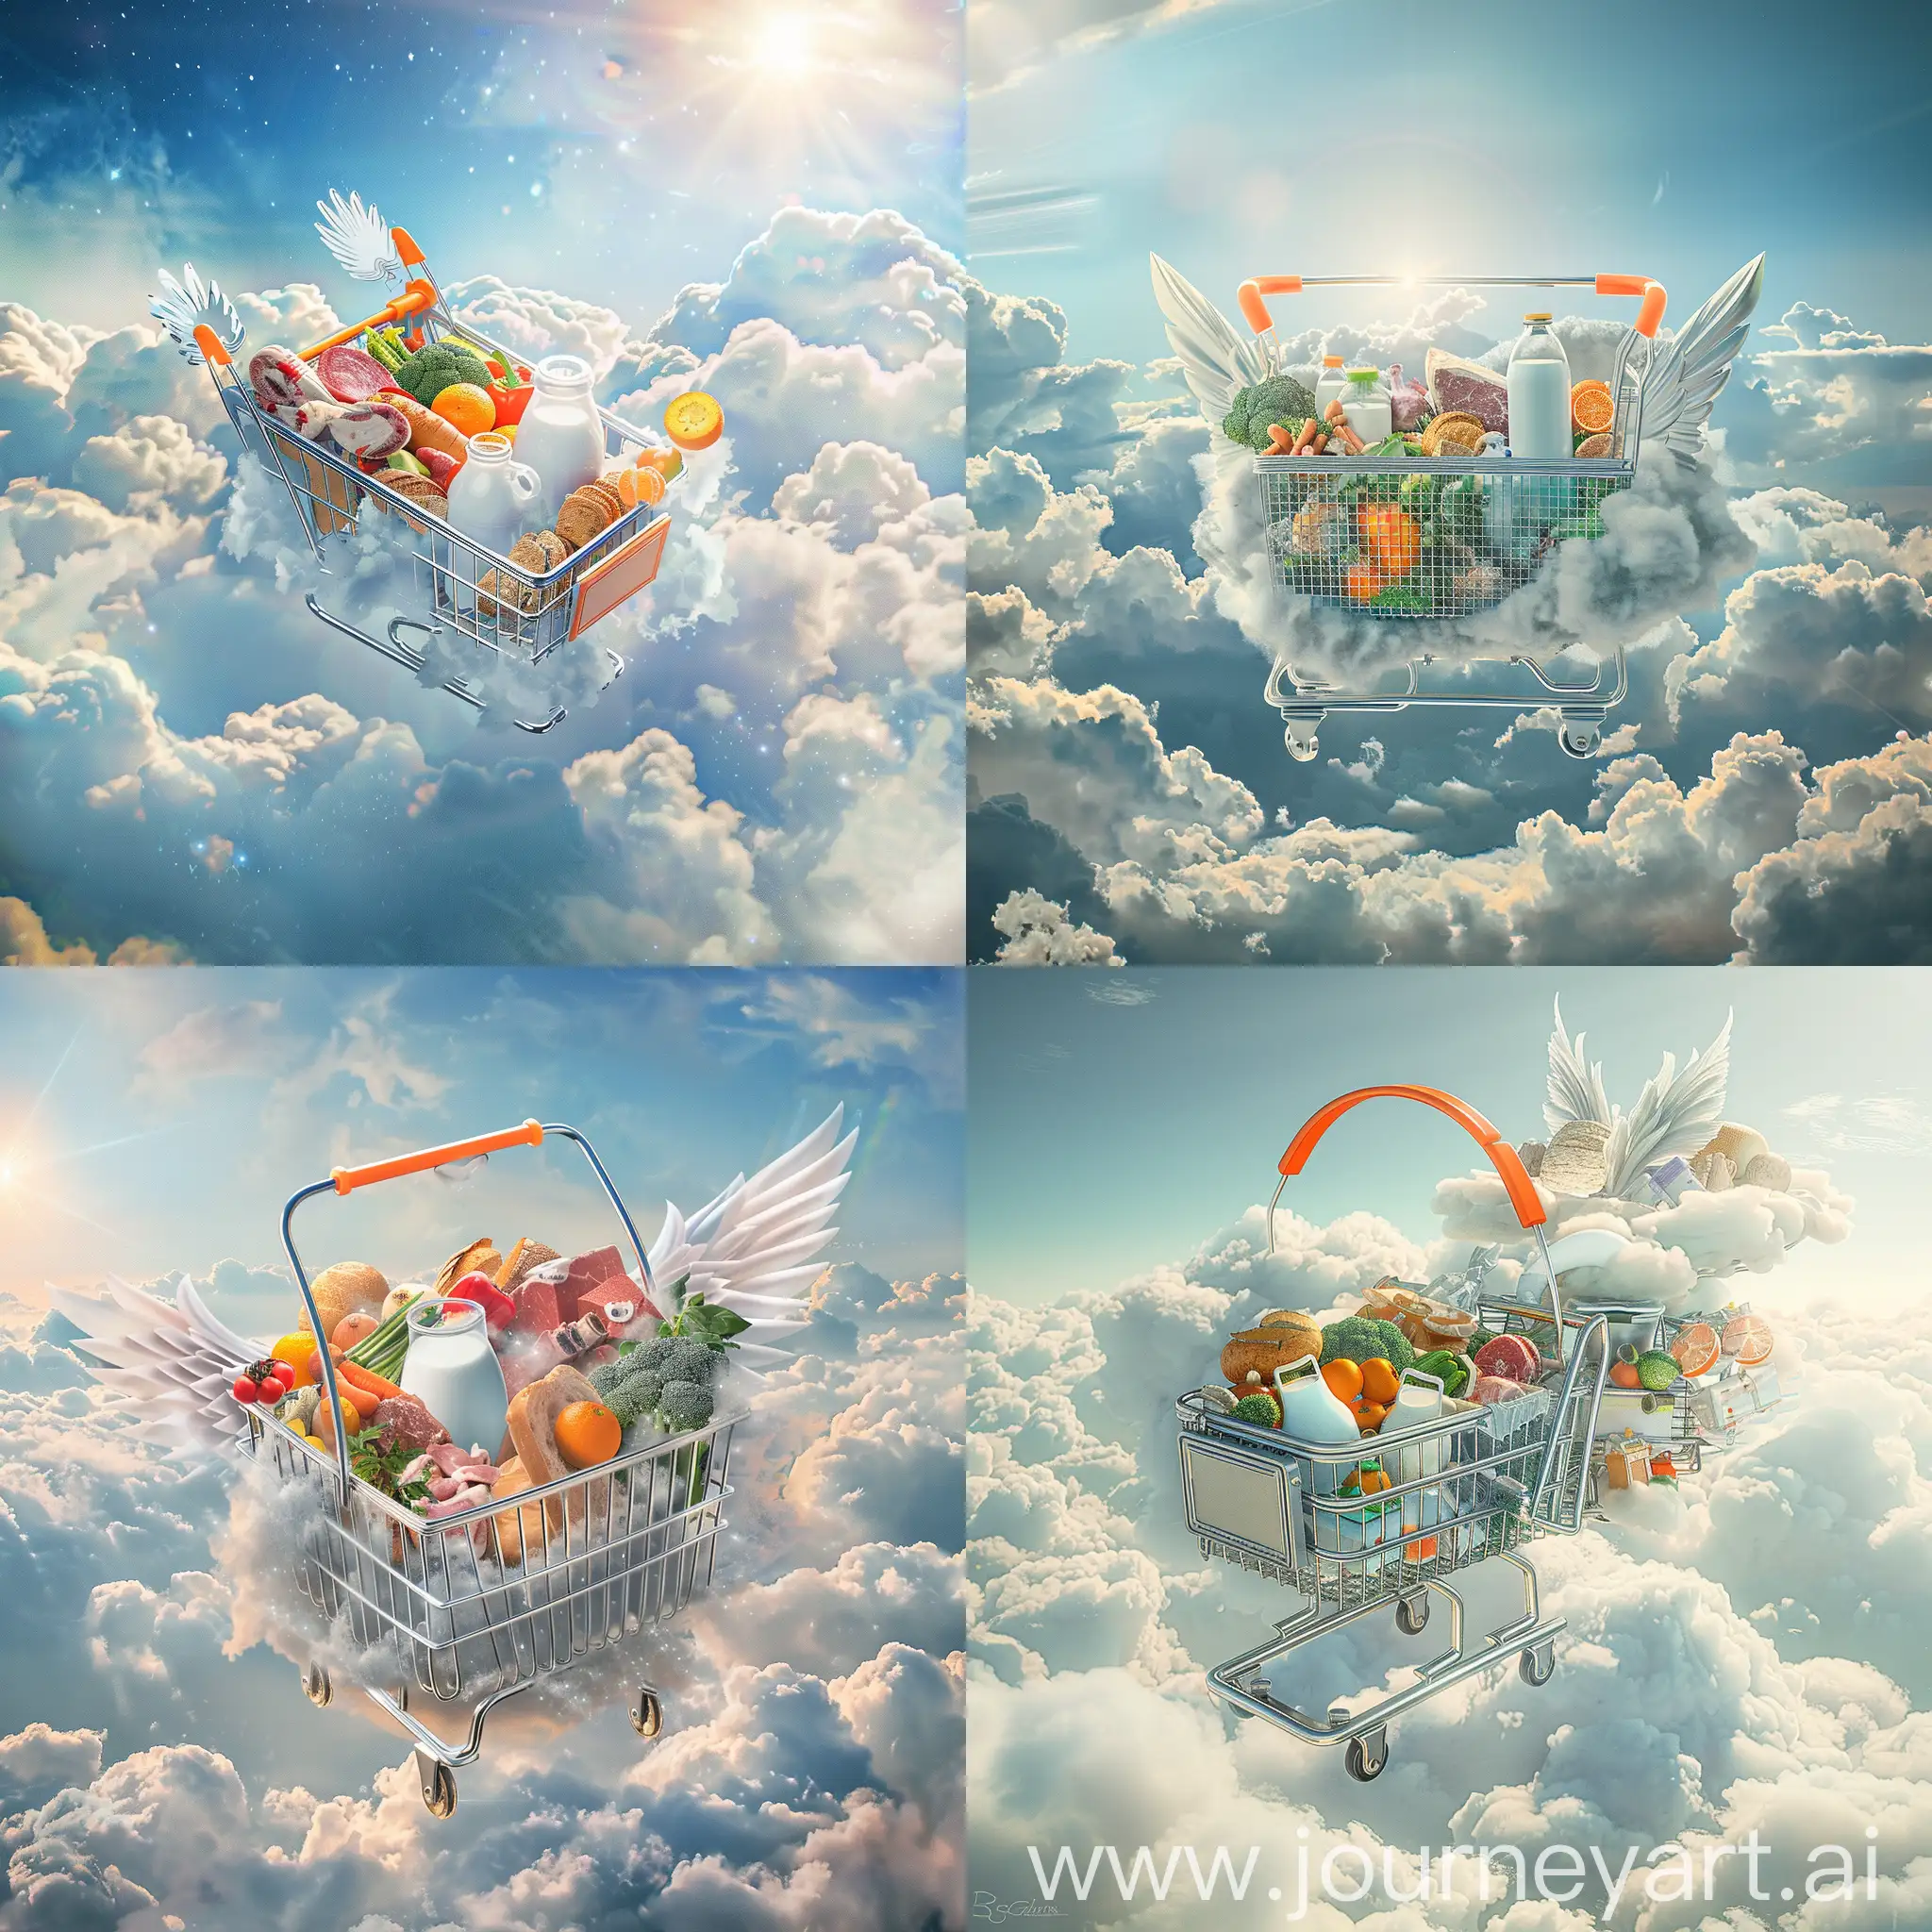 Soaring-Shopping-Basket-with-Groceries-Above-Clouds